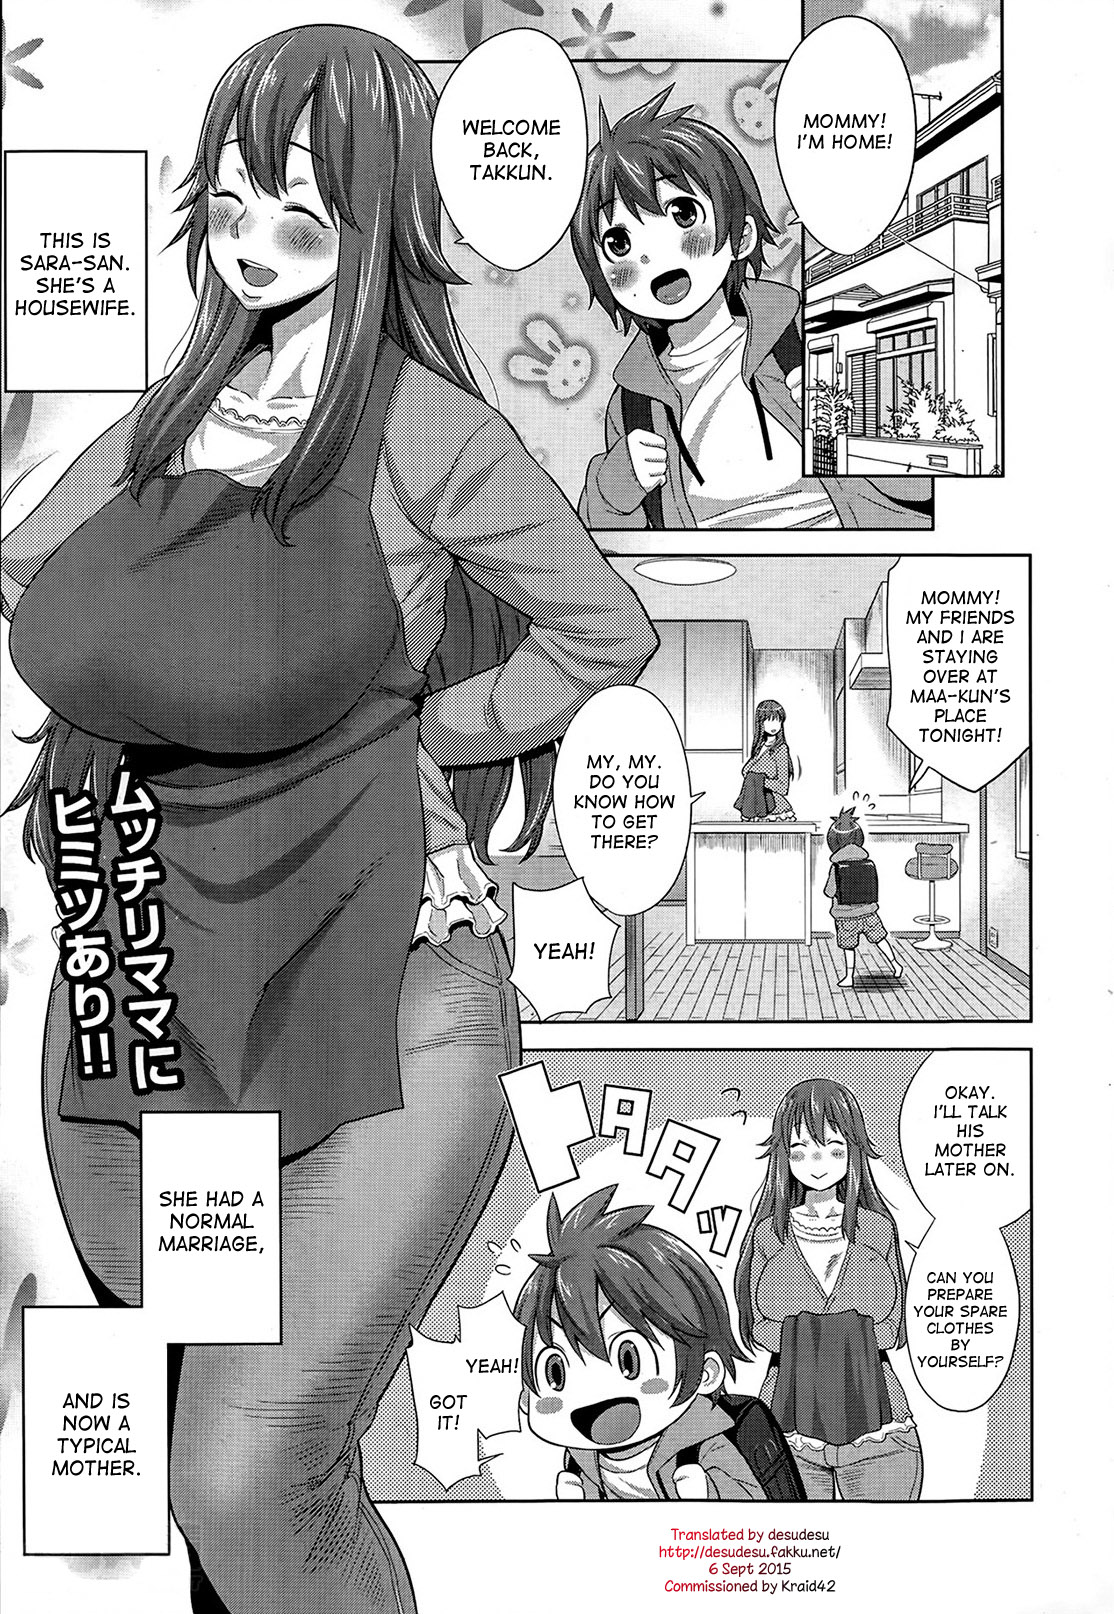 This Mother is a Pervert by Agata Hentai Comic